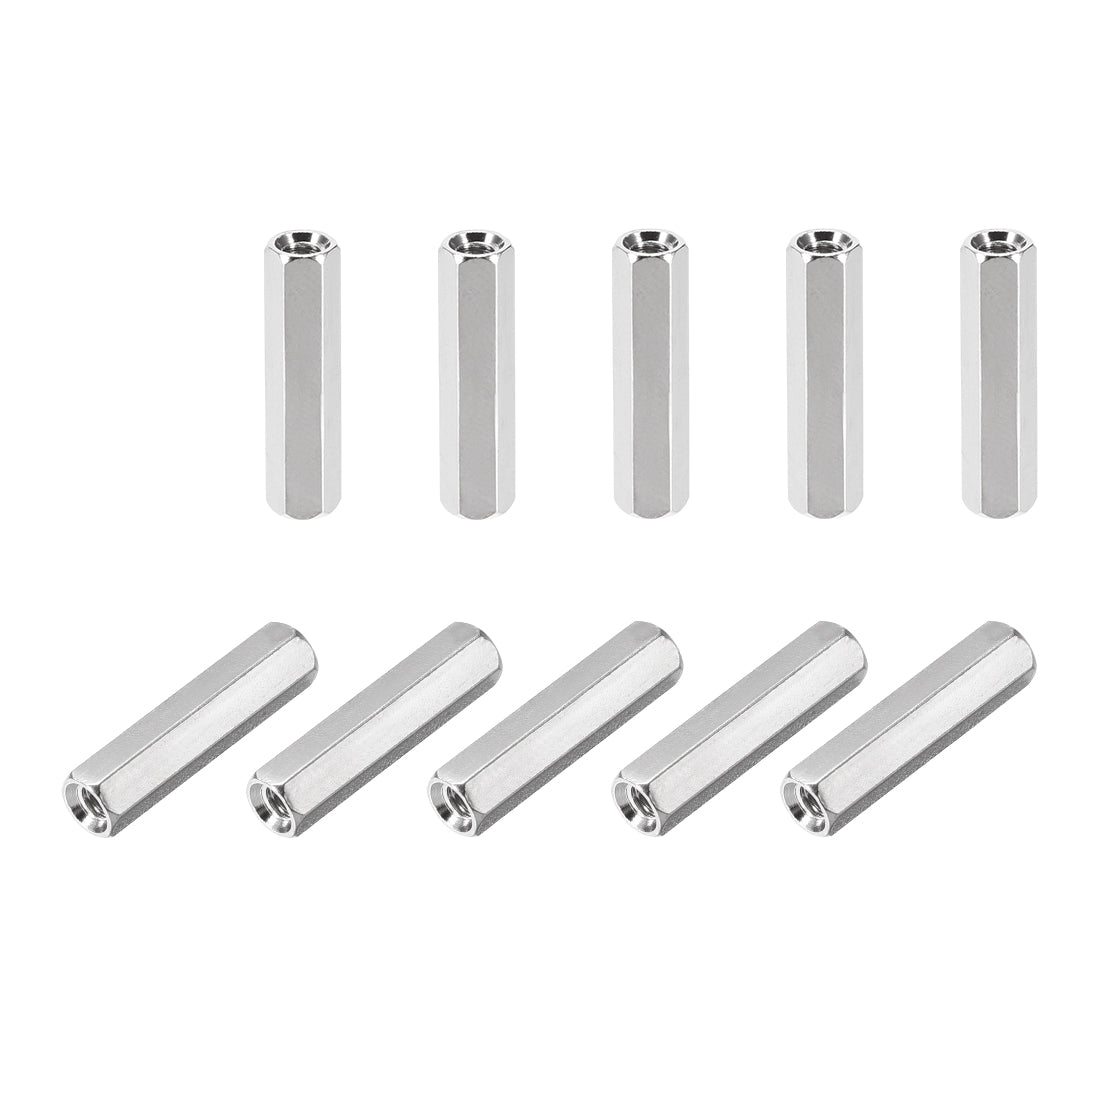 Uxcell Uxcell M3 x 45mm Female to Female Hex Nickel Plated Spacer Standoff 20pcs